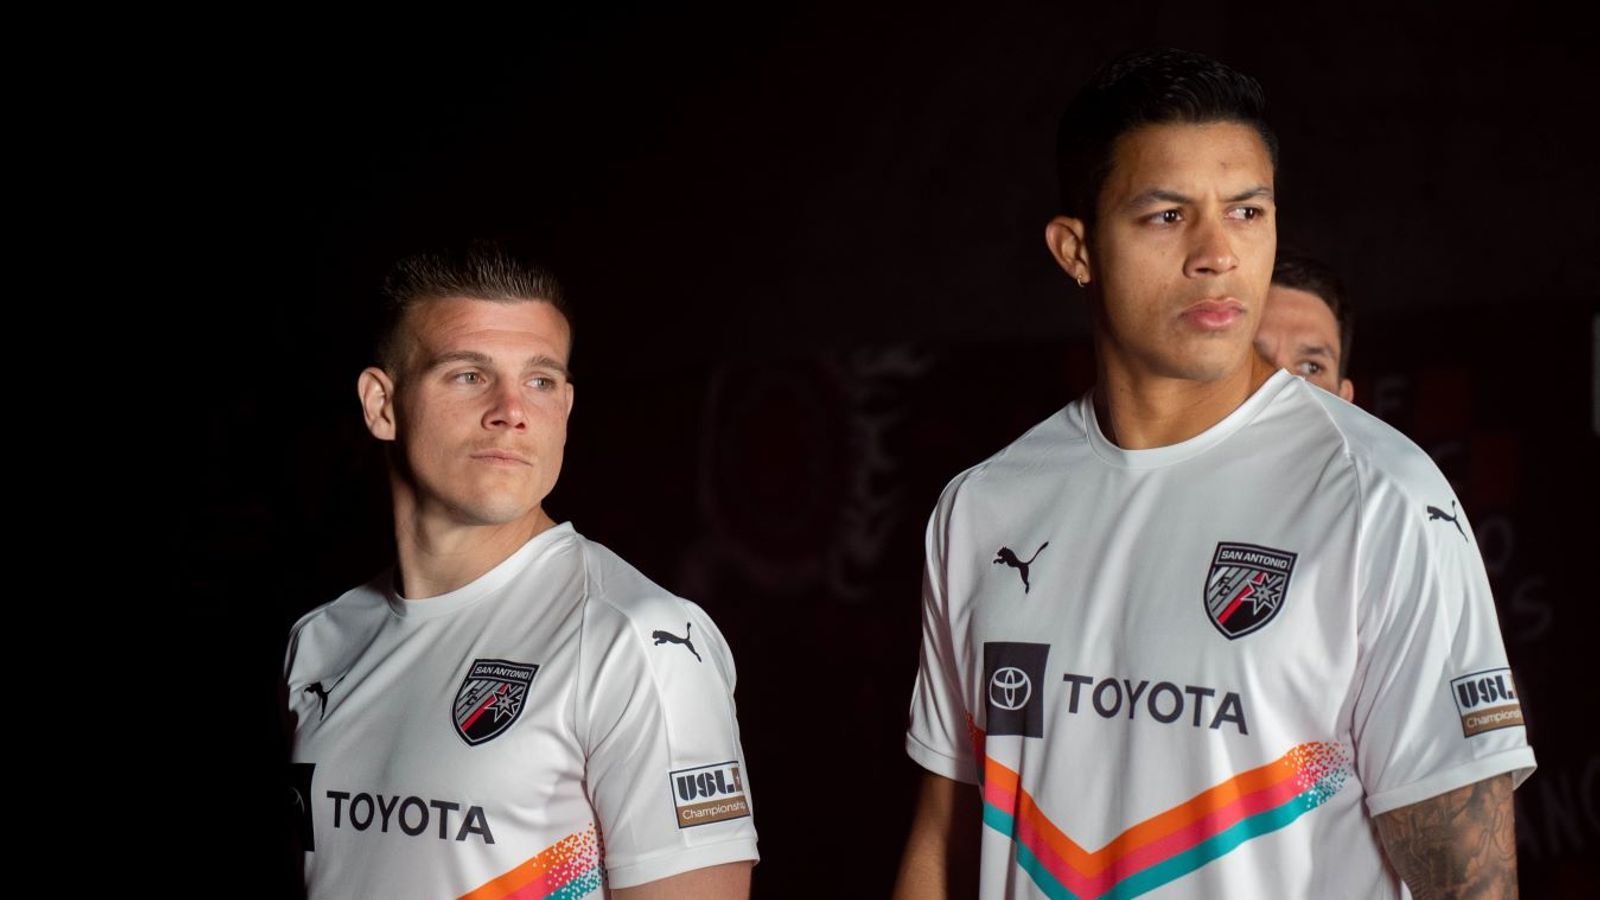 San Antonio FC on X: Our city's pride. The perfect threads for the next  couple of weeks are here! Get yours at @SoccerFactoryTX now and bid on  signed, player-worn pregame tops for